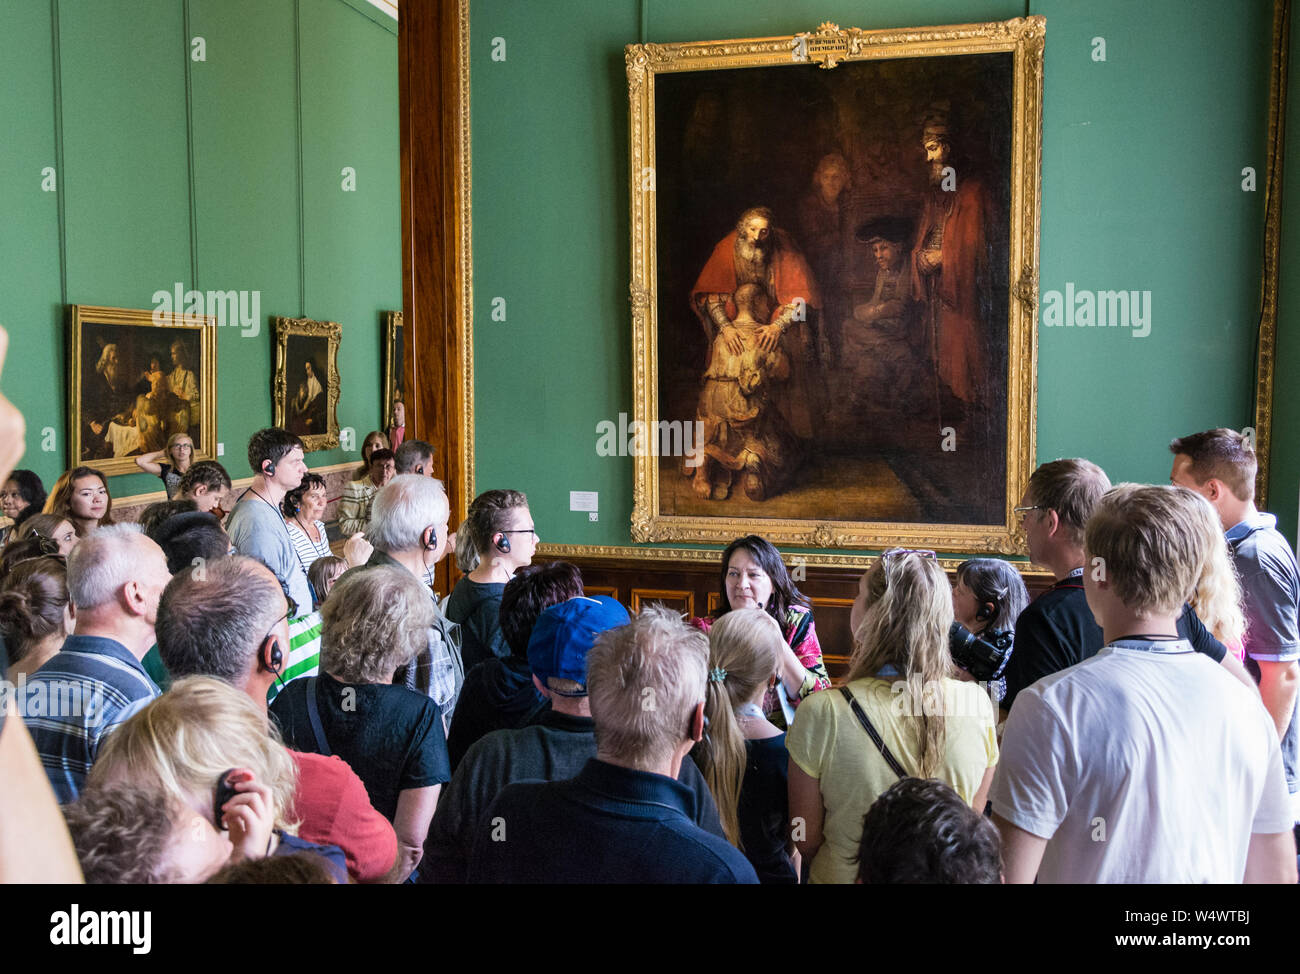 ST. PETERSBURG, RUSSIA - JULY 12, 2016: Visitors admire paintings by Rembrandt, 'The Return of the Prodigal Son' Stock Photo